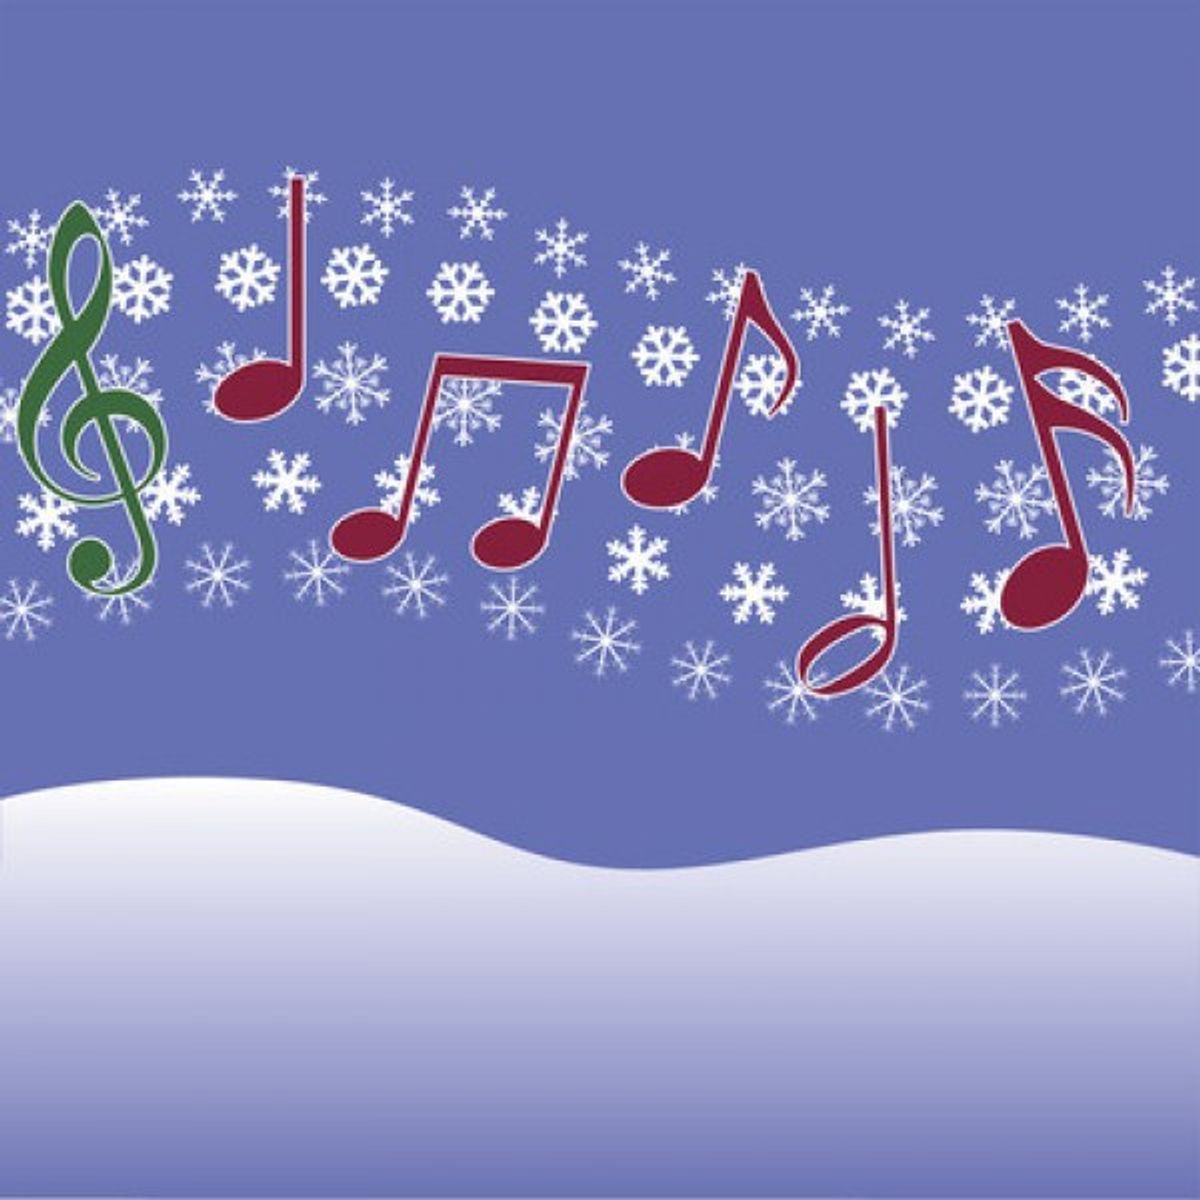 Christmas Music: Music In It's Most Hated Form